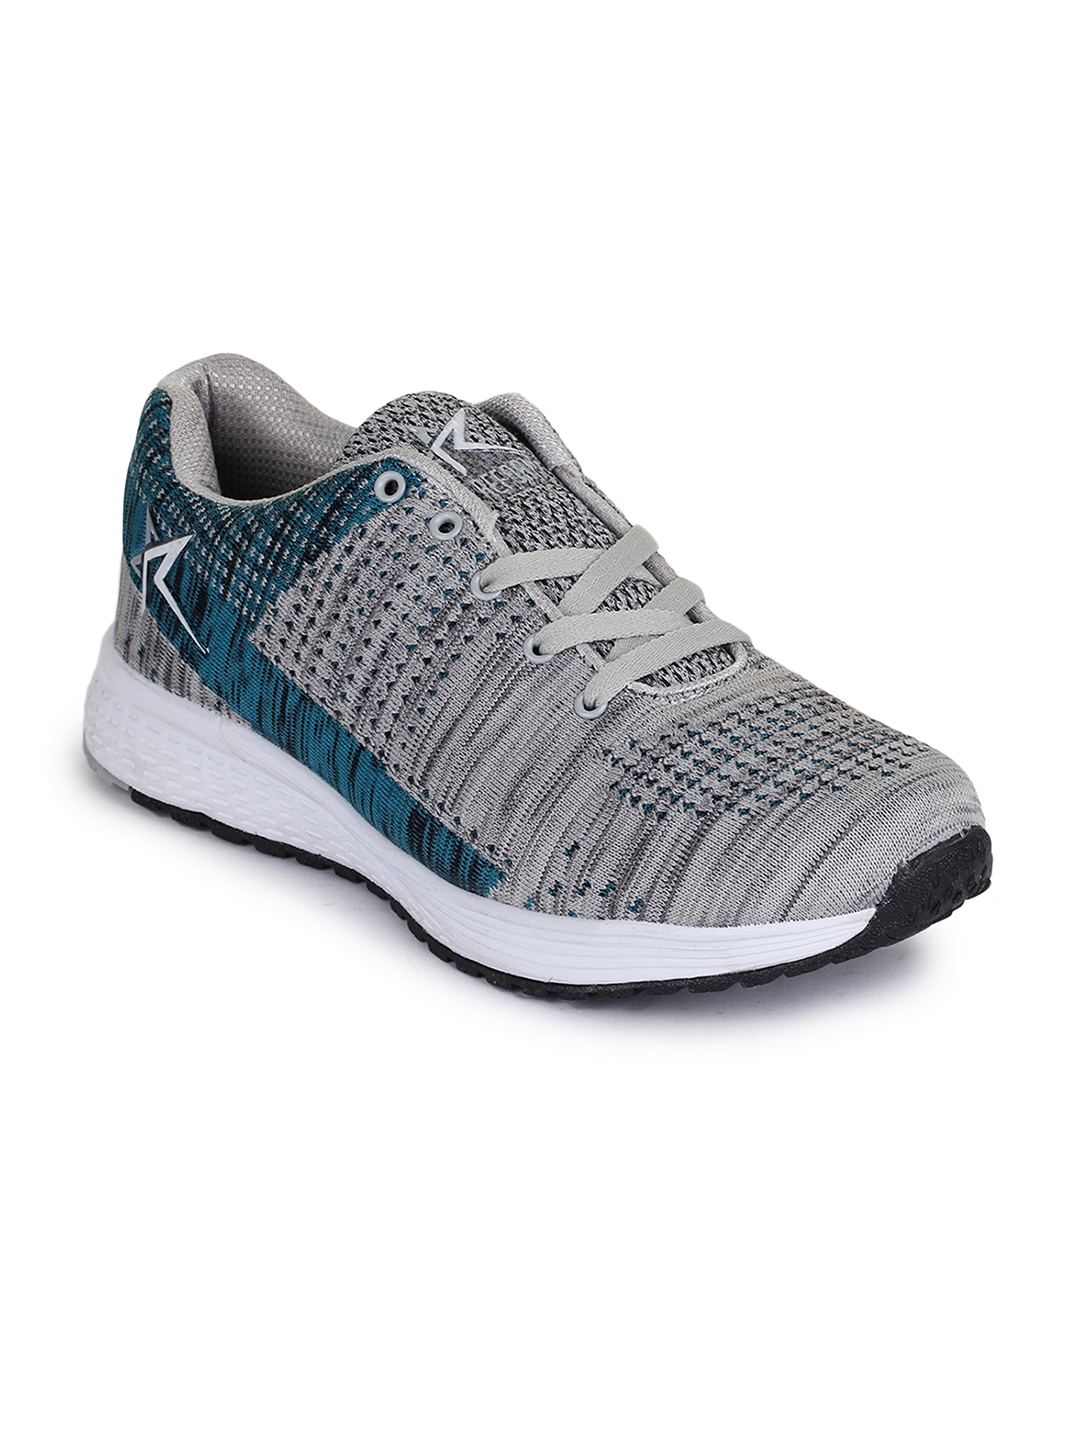 refoam sports shoes